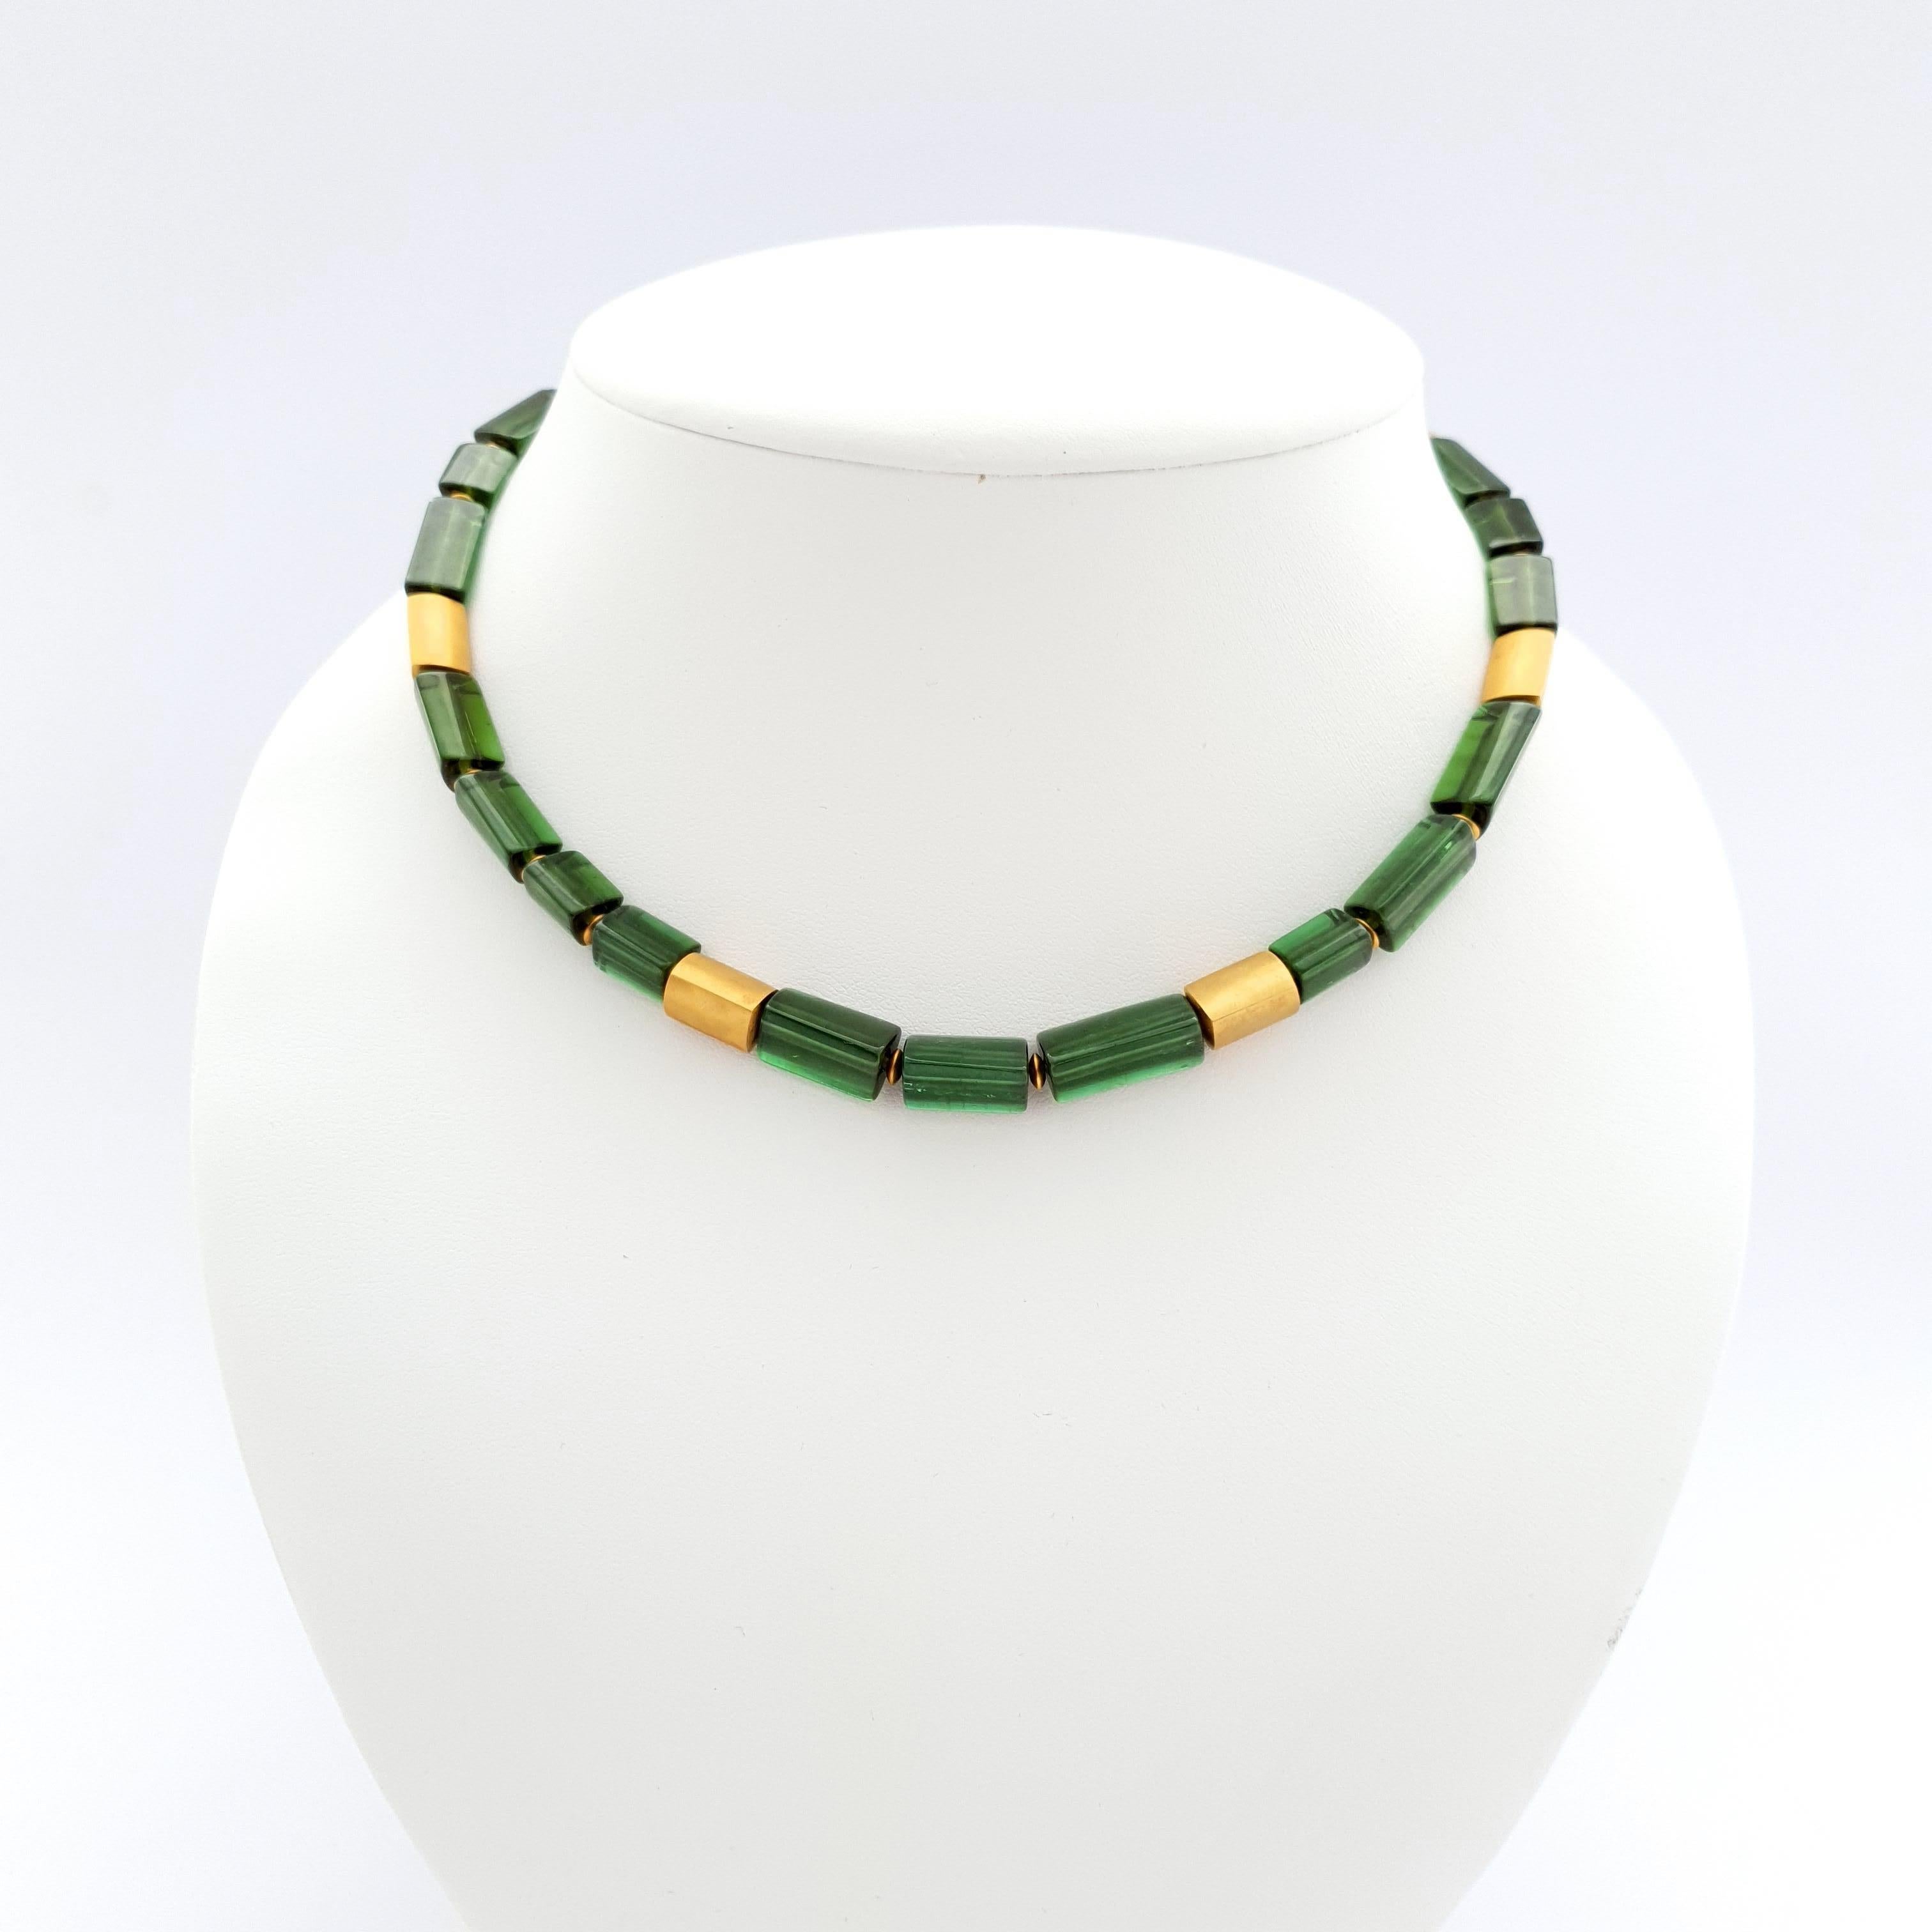 Intense Green Tourmaline Crystal Beaded Necklace with 18 Carat Mat Yellow Gold For Sale 4